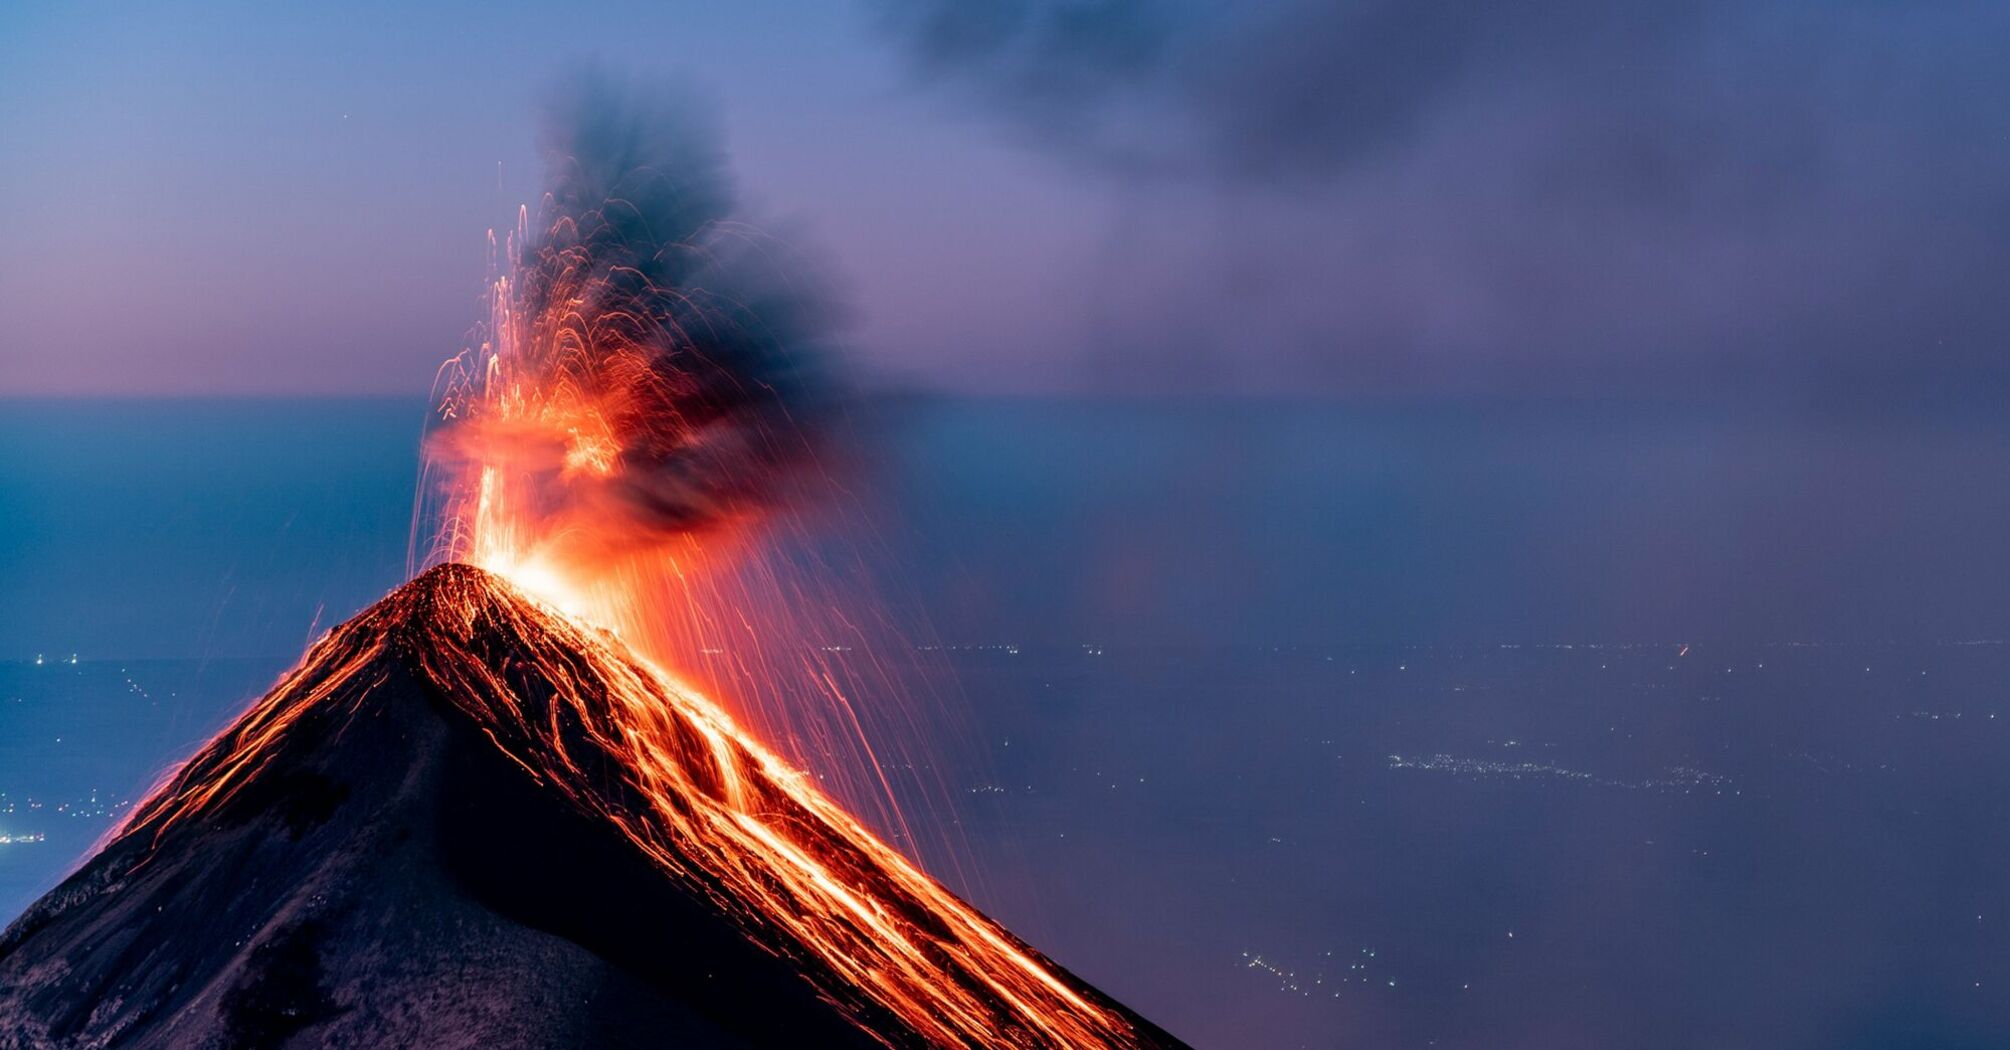 Eruption of a volcano with glowing lava and ash plume at dusk